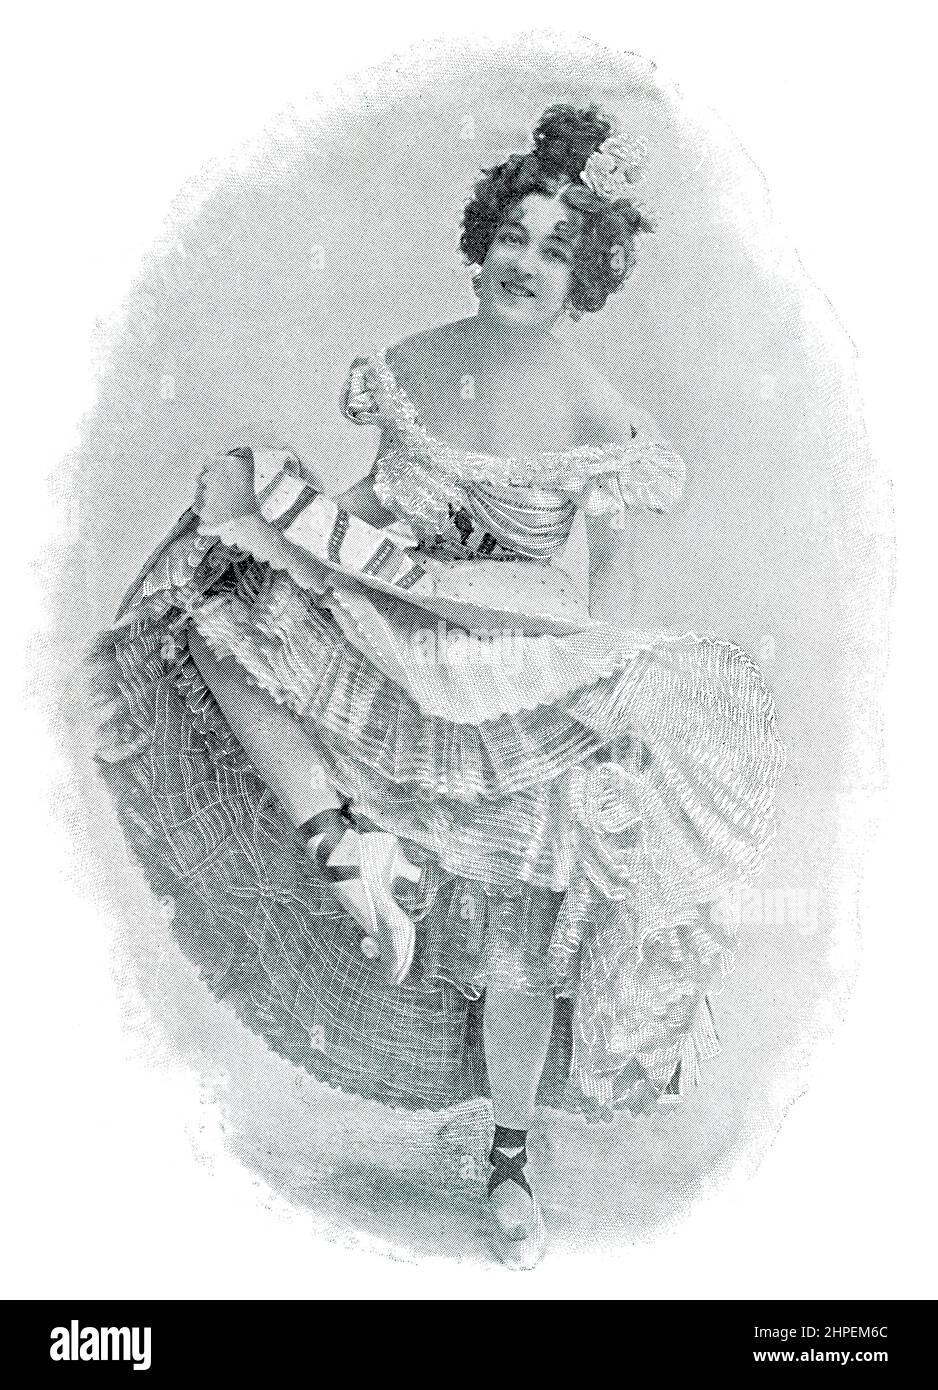 Portrait of Paulina Clarissa Molony (Miss Saharet), an Australian dancer who performed in vaudeville music houses. Image from the illustrated Franco-German theater magazine 'Das Album', 1898. Stock Photo